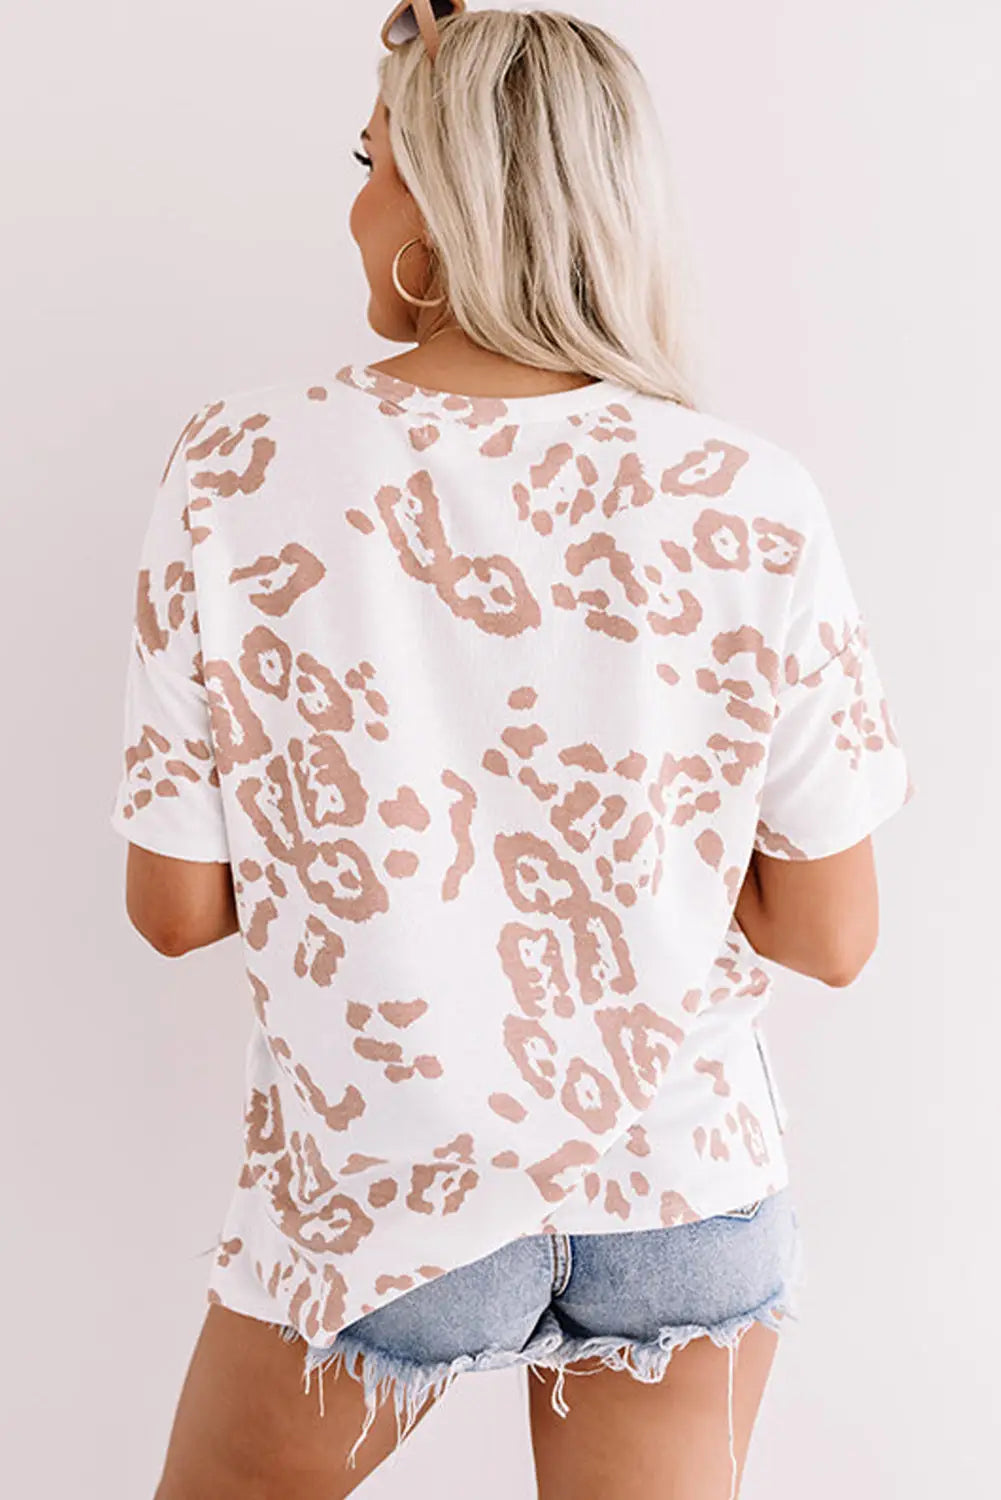 White top - plus size leopard print v neck short sleeve - tops & tees